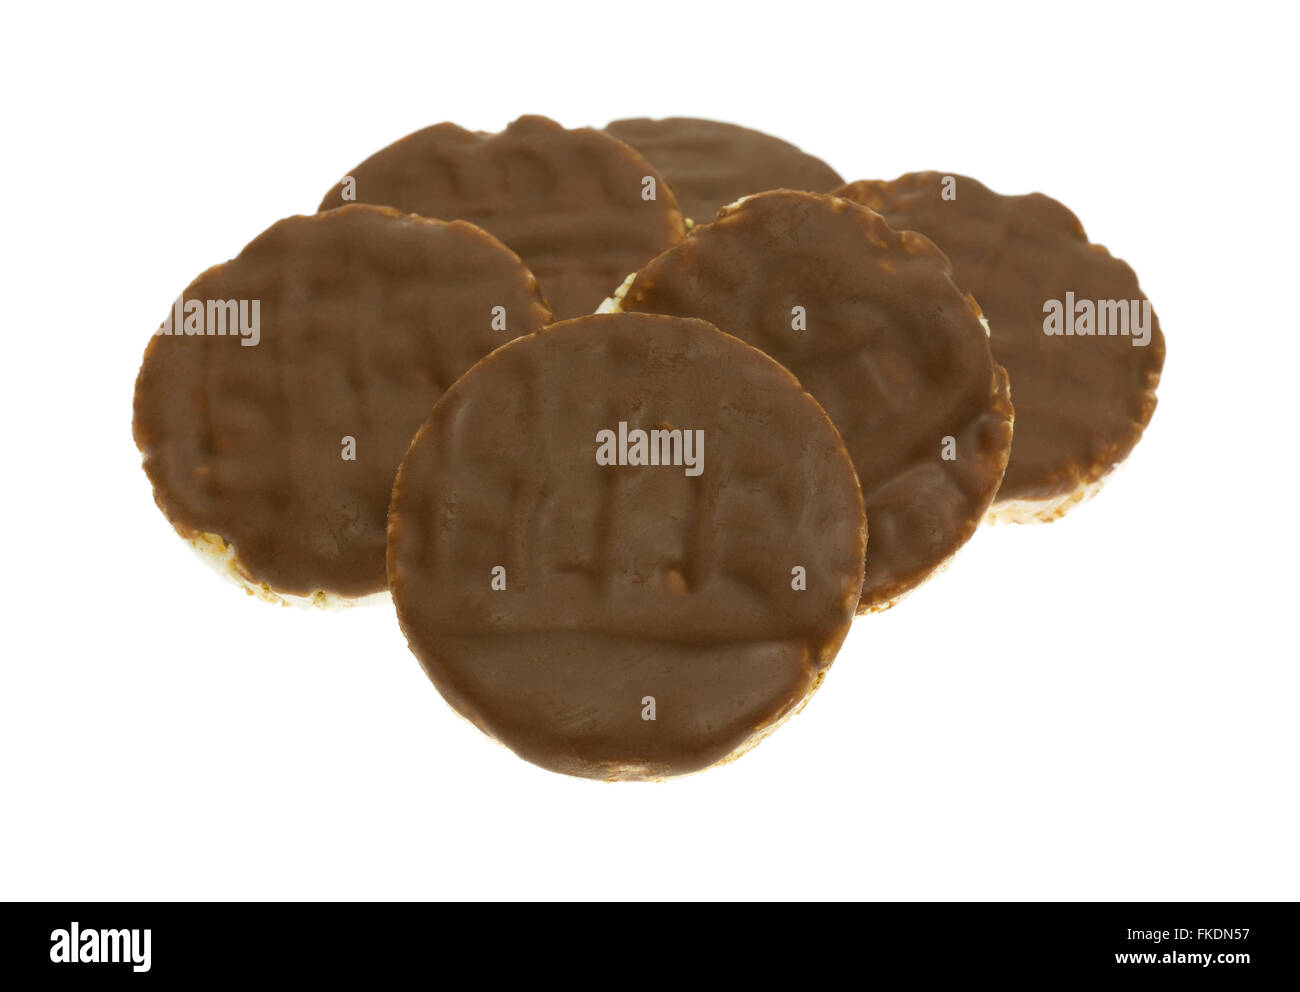 Side view of a group of organic rice cookies with milk chocolate icing isolated on a white background. Stock Photo